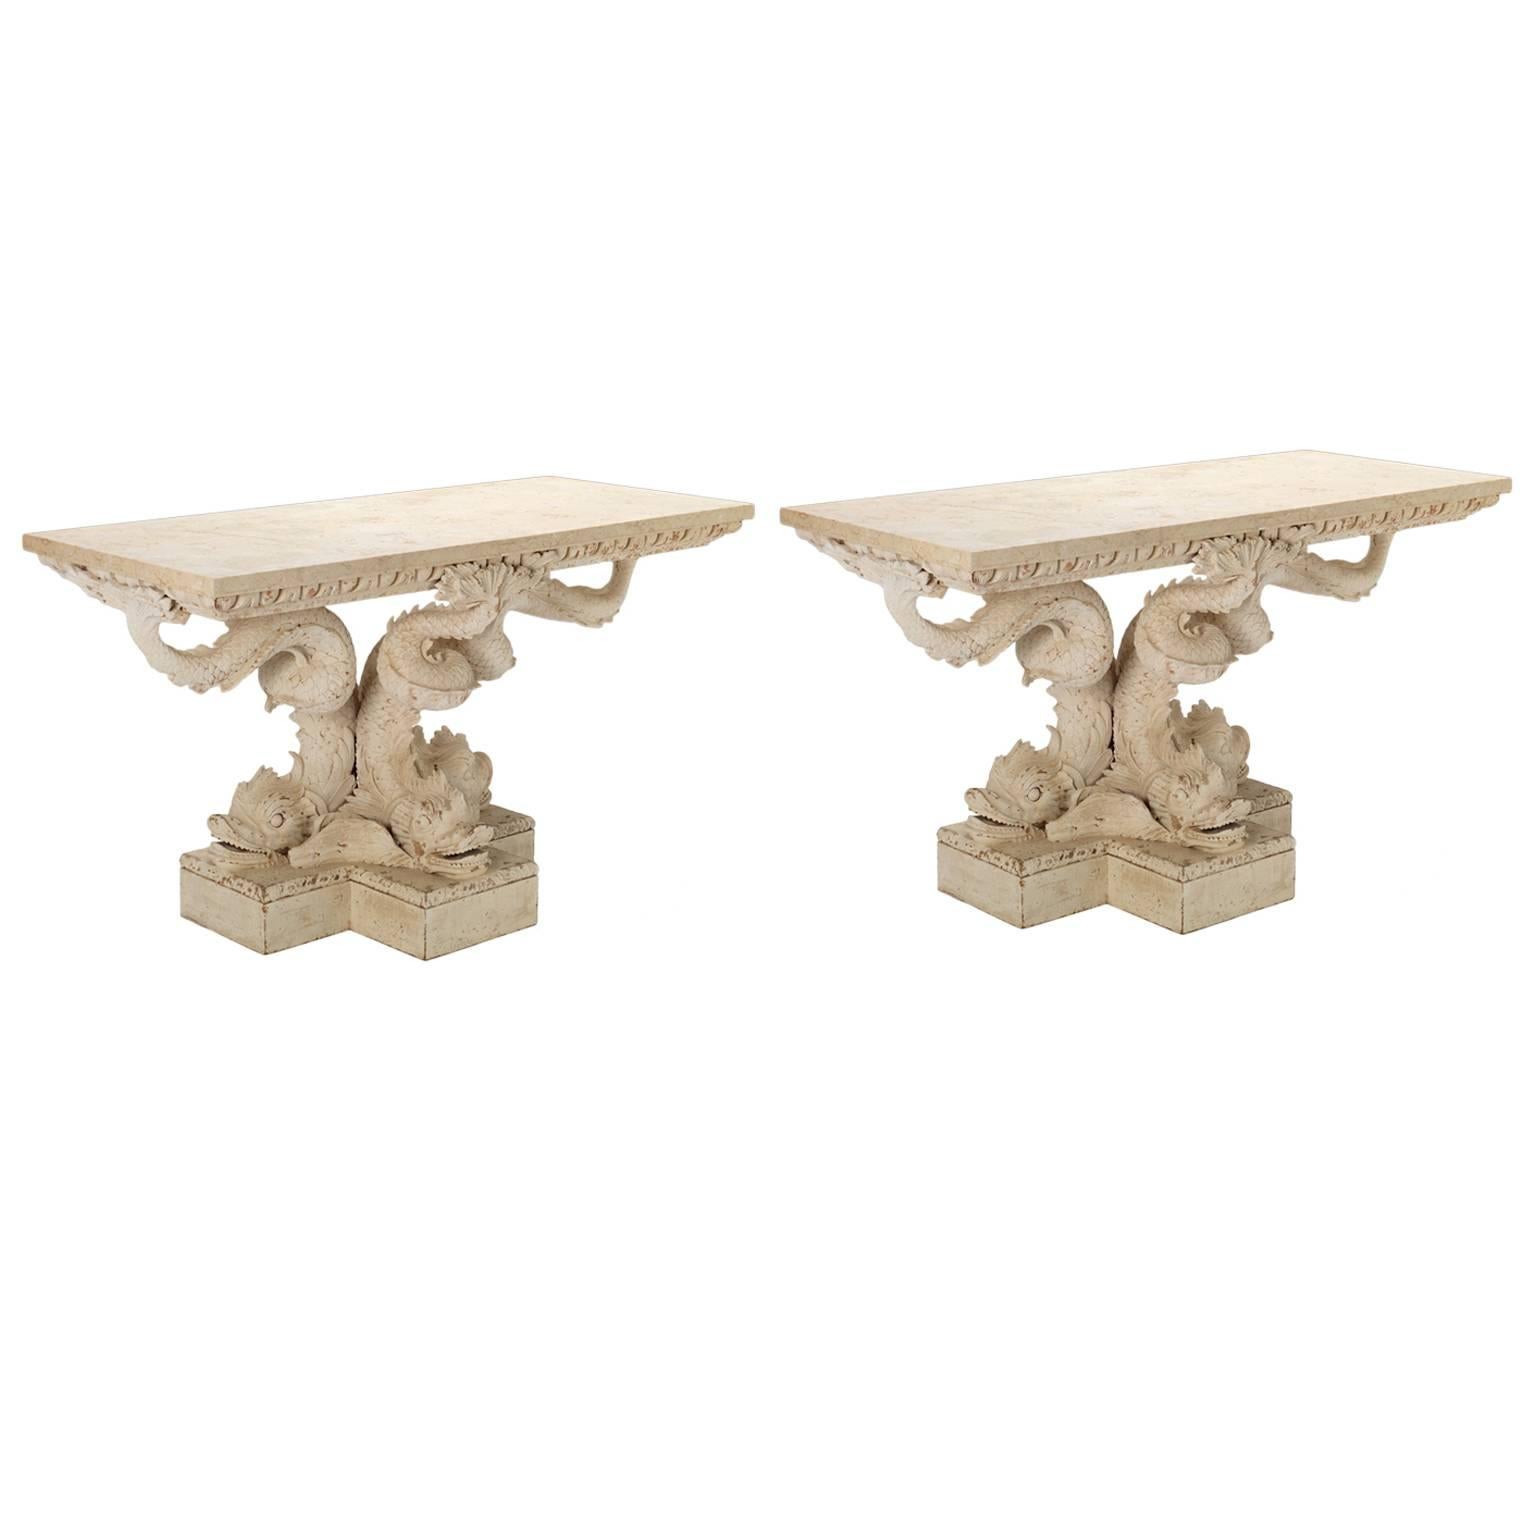 A Fine pair of dolphin console tables designed in the style of William Kent, the marble tops resting upon an egg-and-dart frieze supported by a trio of stylized Kentian dolphins resting upon carved step work plinths.

This item is made to order.

We